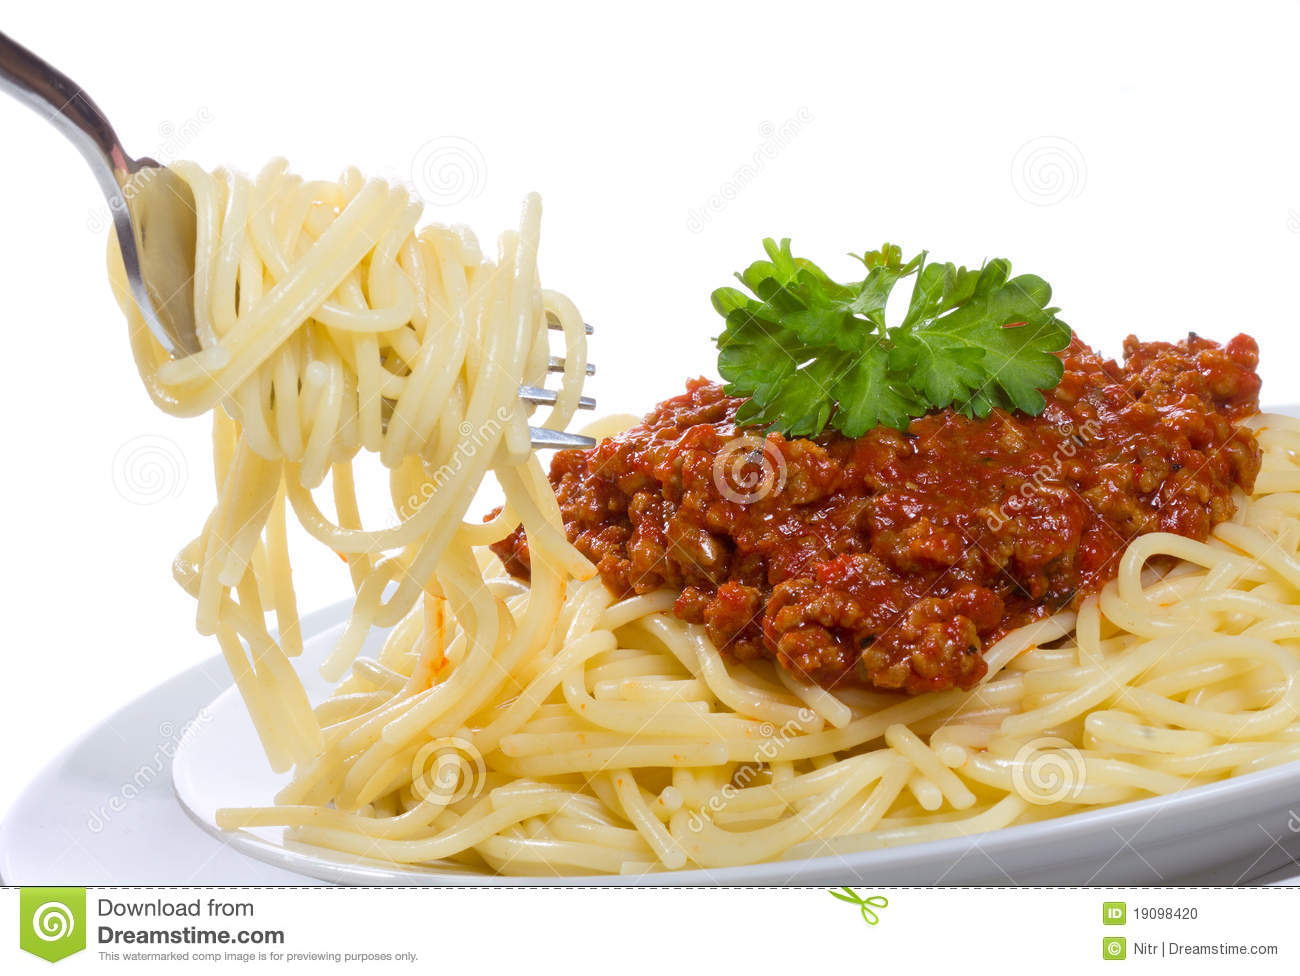 Spaghetti With Meat Sauce Stock Photo   Image  19098420